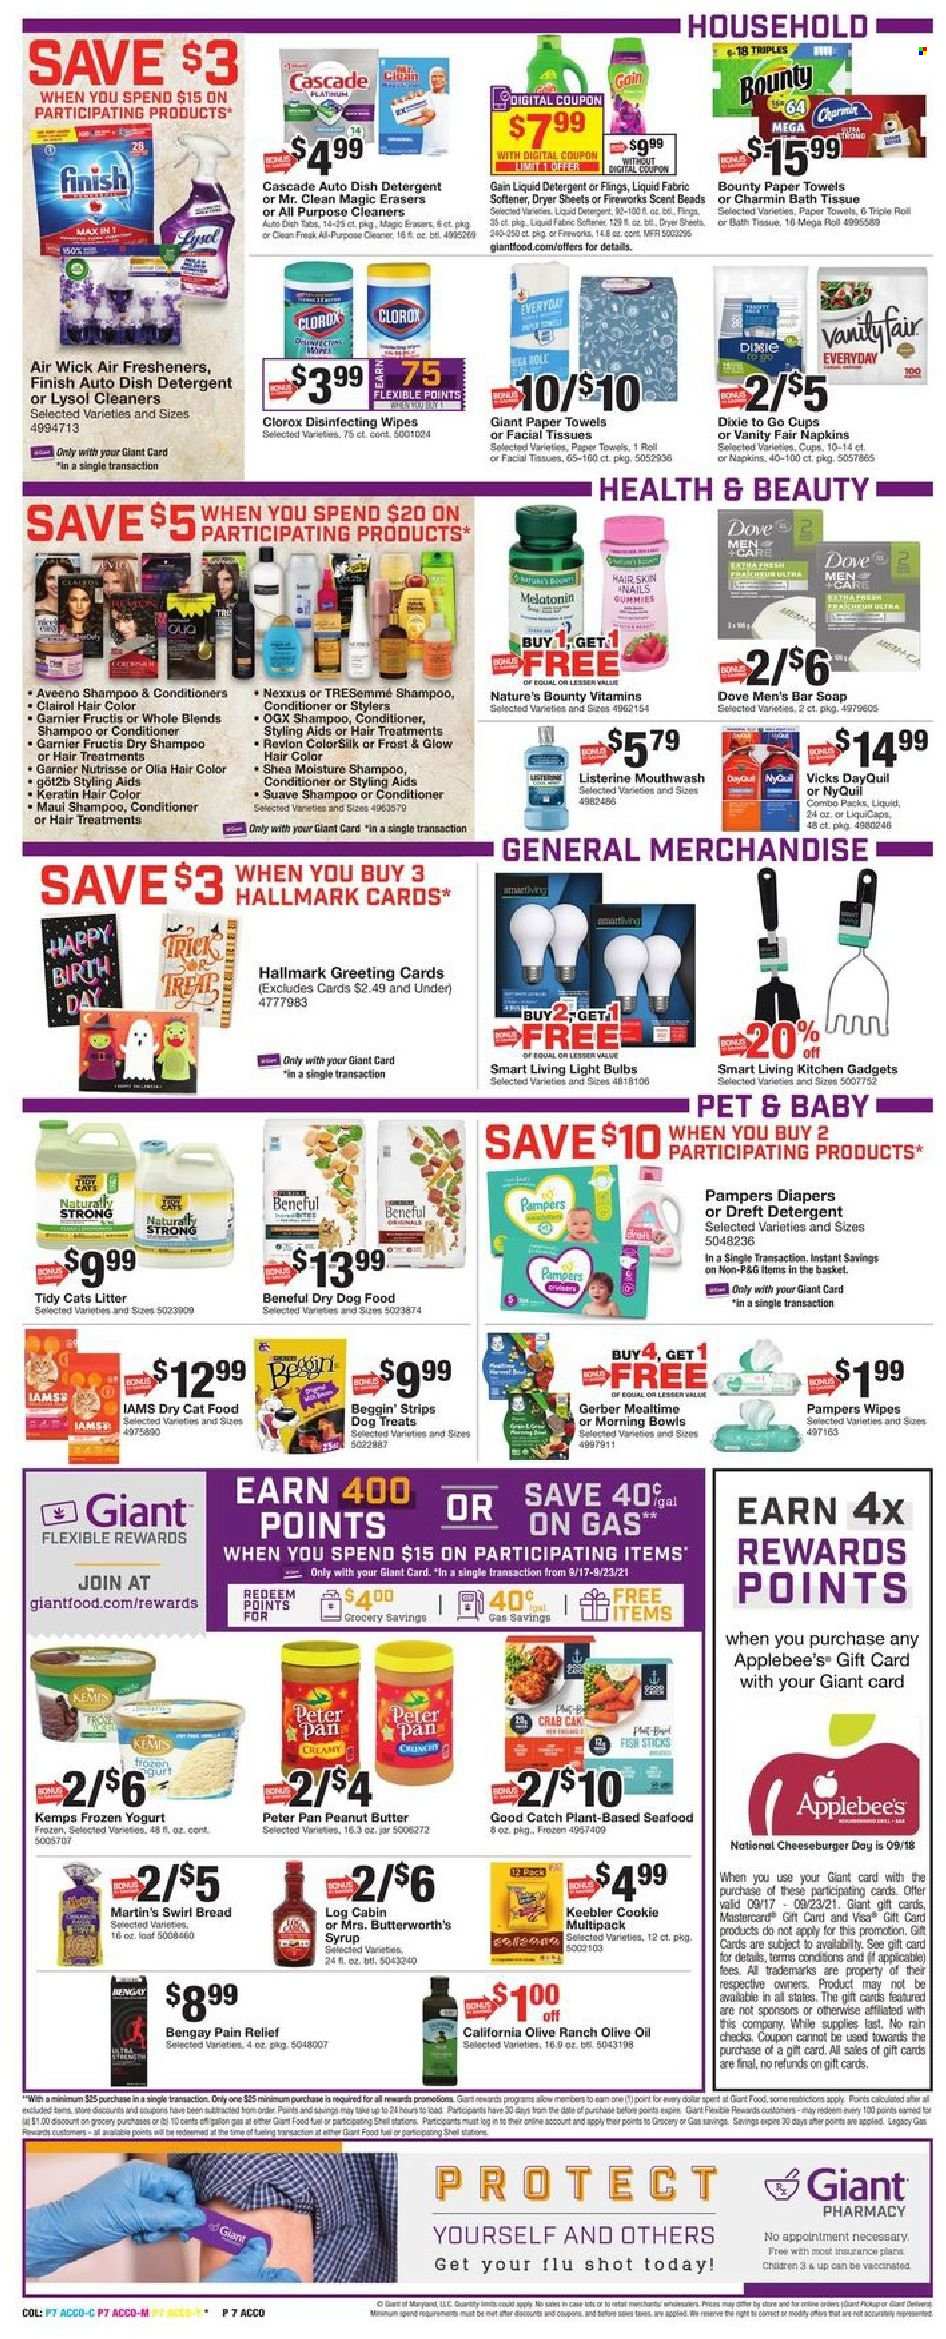 thumbnail - Giant Food Flyer - 09/17/2021 - 09/23/2021 - Sales products - bread, crab, fish, fish fingers, fish sticks, cheeseburger, Kemps, yoghurt, strips, Keebler, Gerber, olive oil, oil, peanut butter, syrup, L'Or, wipes, Pampers, napkins, nappies, Aveeno, Dove, bath tissue, kitchen towels, paper towels, Charmin, detergent, Gain, Lysol, Clorox, Cascade, fabric softener, liquid detergent, dryer sheets, shampoo, Suave, soap bar, soap, Listerine, mouthwash, facial tissues, Garnier, OGX, Clairol, conditioner, TRESemmé, hair color, Nexxus, keratin, Fructis, Vicks, Dixie, pan, cup, air freshener, Air Wick, bulb, light bulb, animal food, cat food, dog food, dry dog food, dry cat food, Iams, pain relief, DayQuil, Melatonin, Nature's Bounty, NyQuil, Bengay. Page 7.